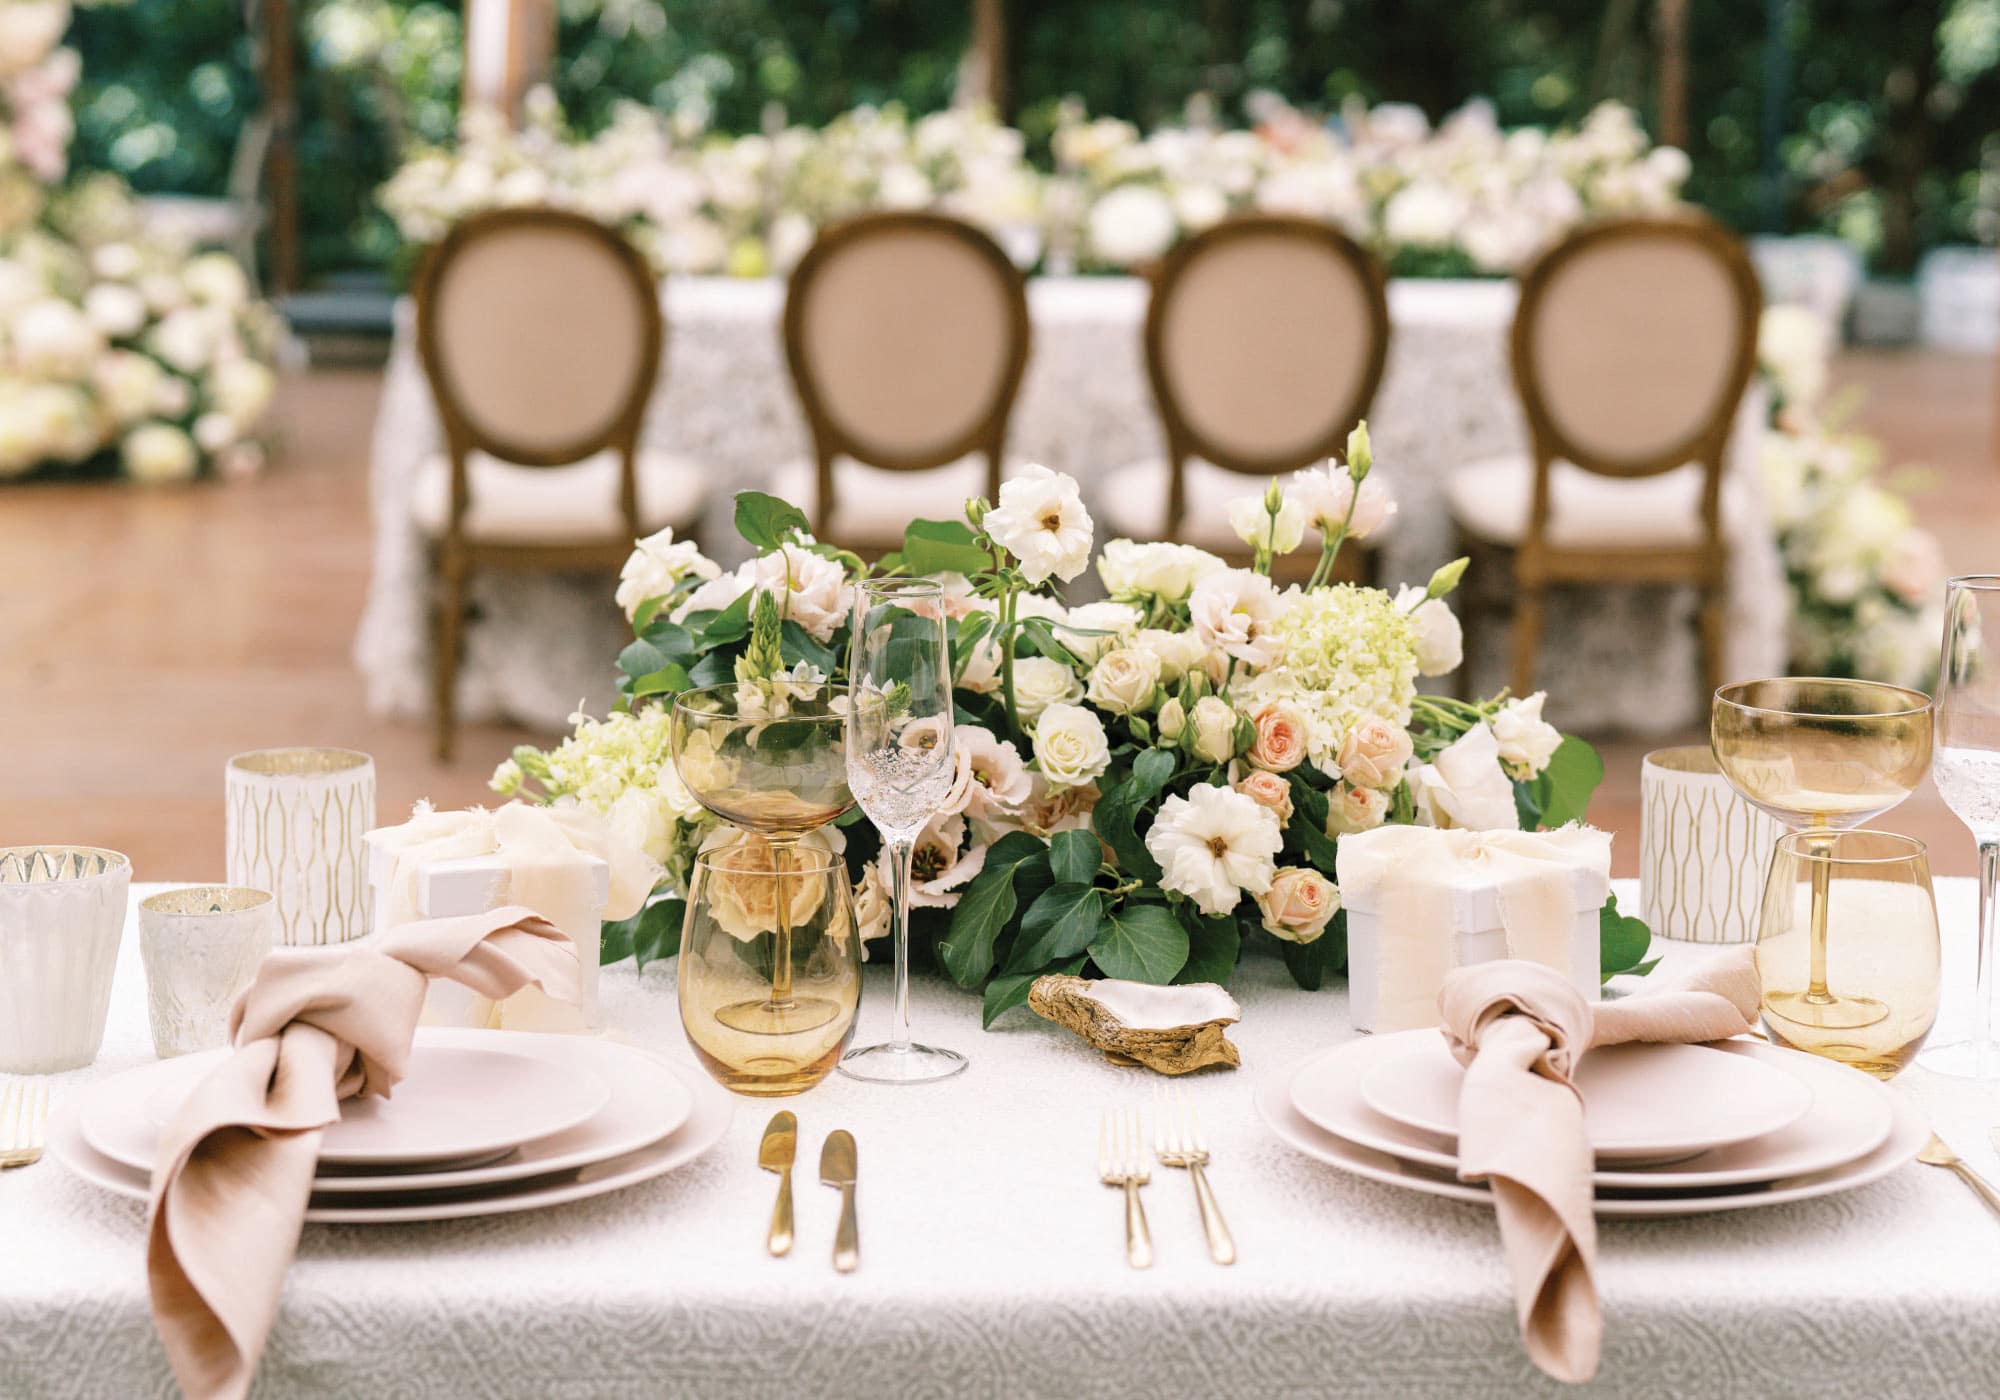 The Clifton Inn styled wedding shoot, Photography by Hana Gonzalez, Styled by Karen Duckett Events, Flowers by Floral & Bloom